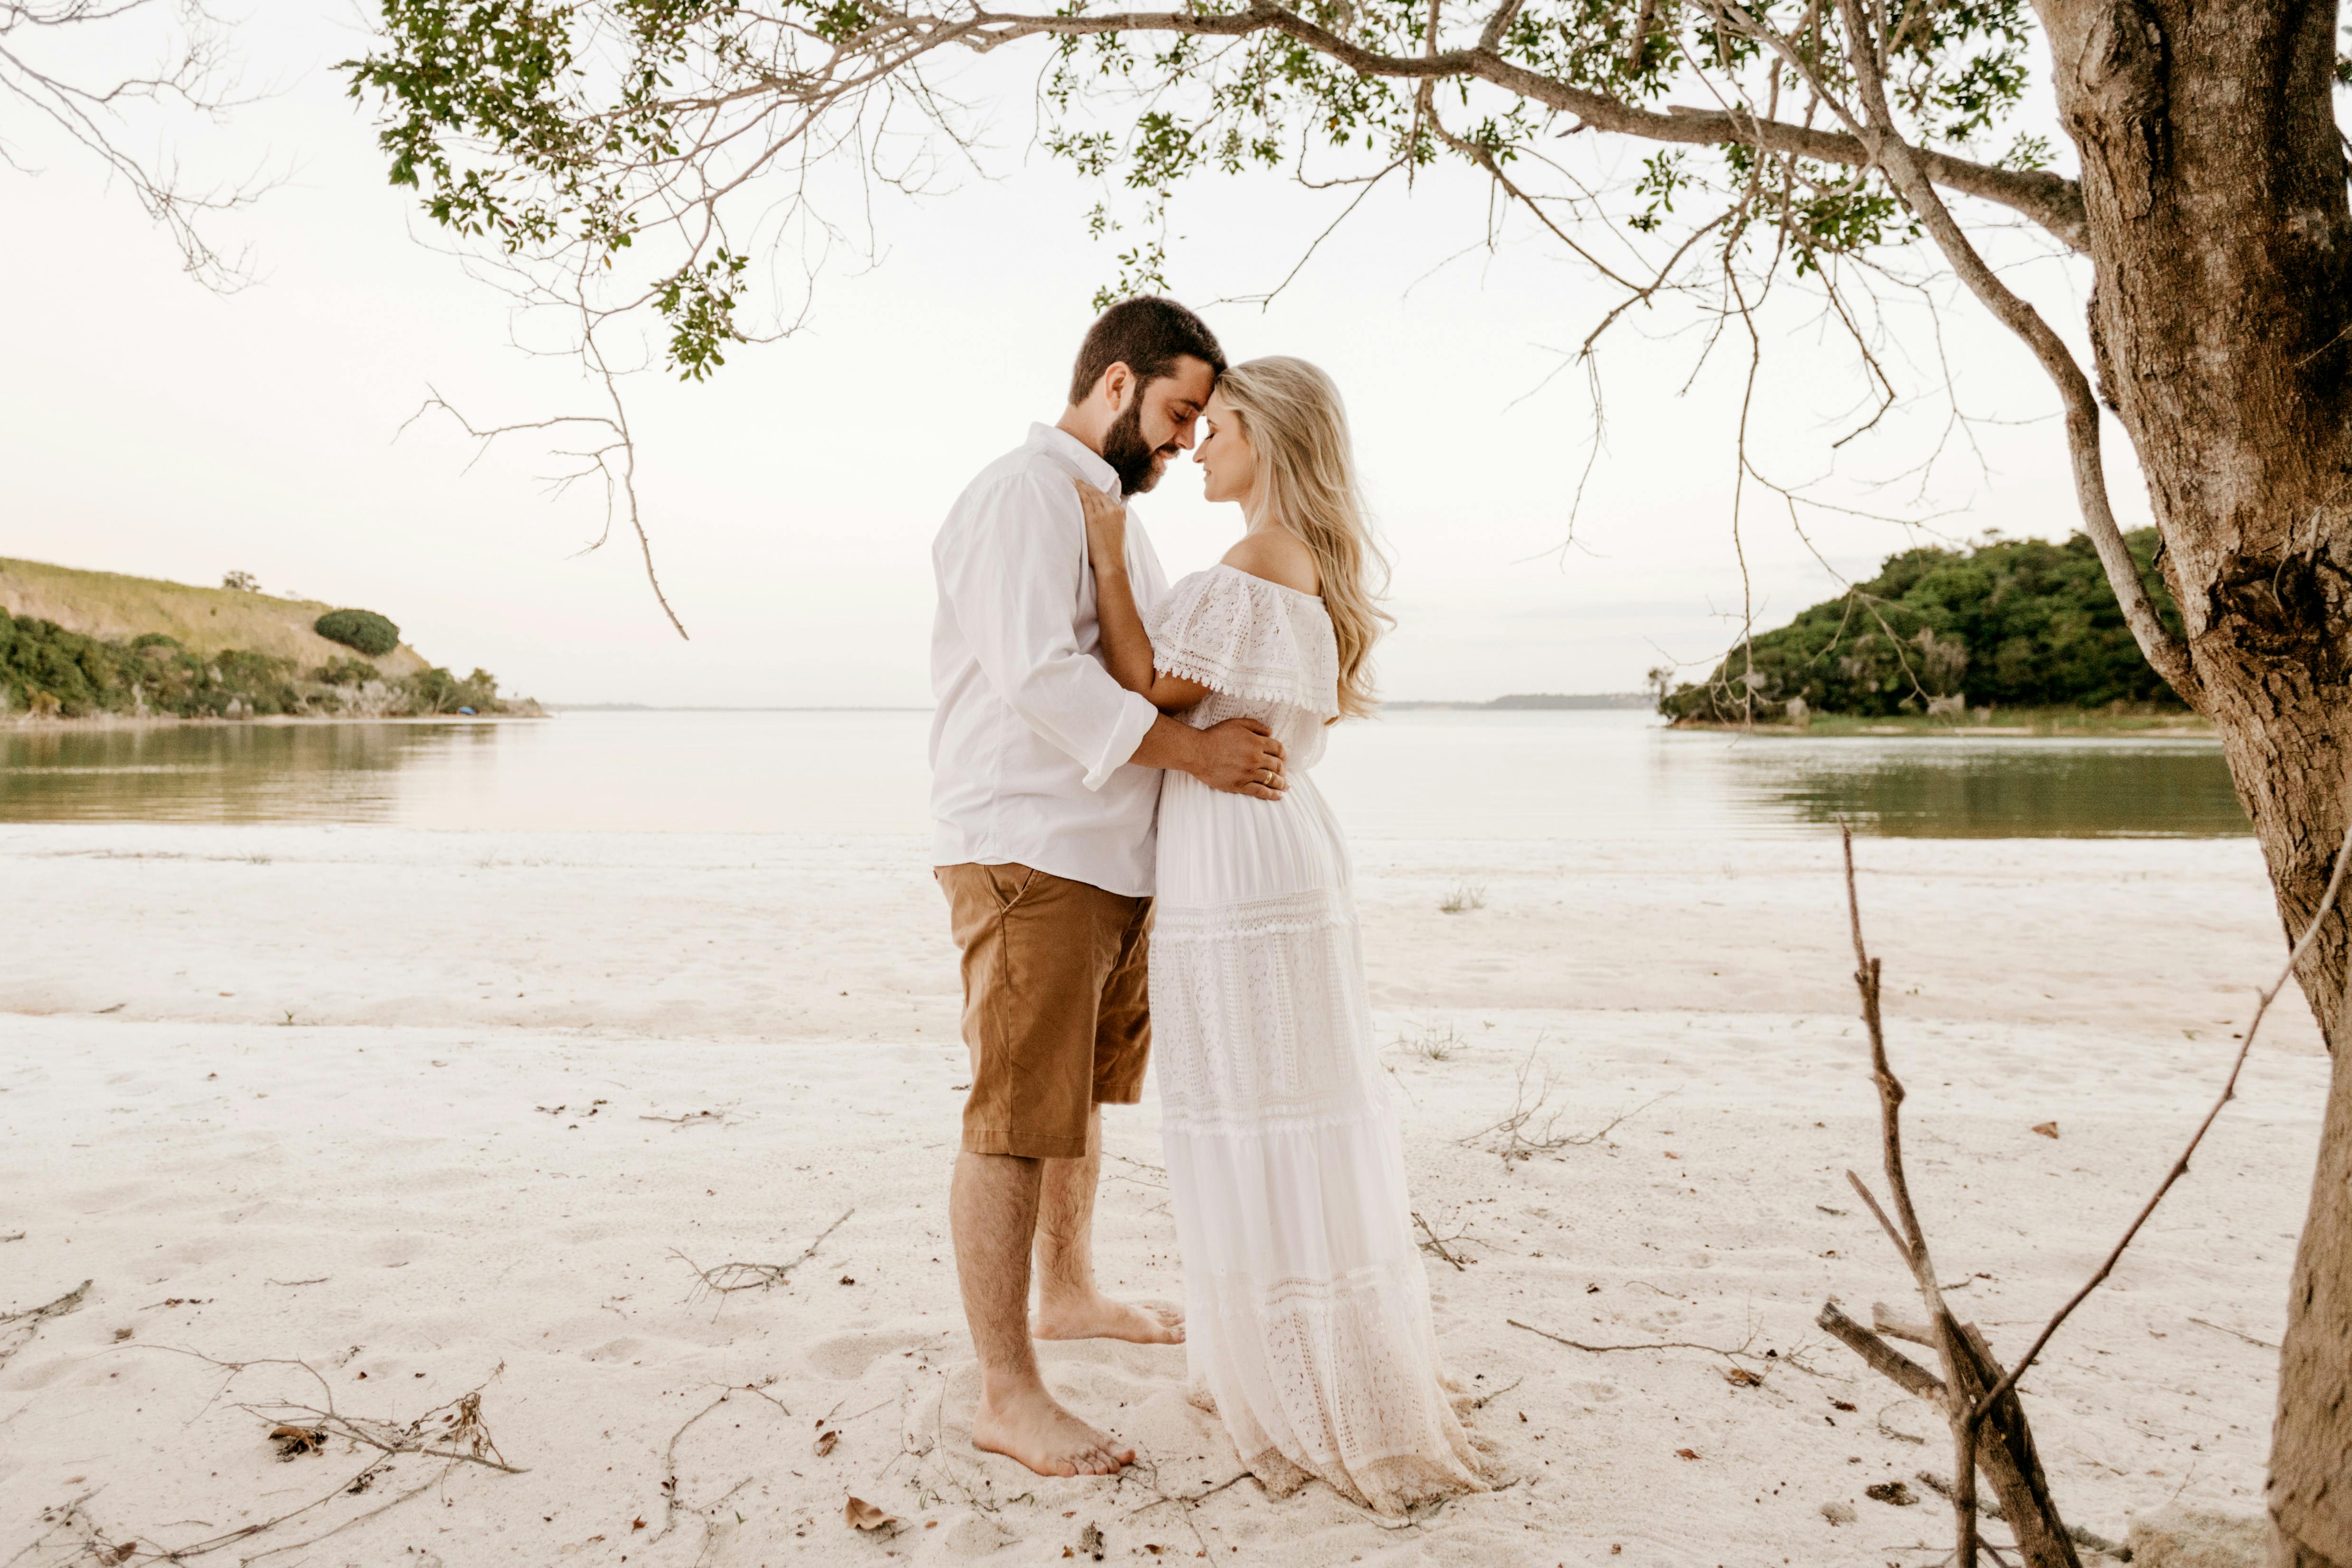 Paradise Found: The Ultimate Guide to Weddings and Honeymoons in the Bahamas